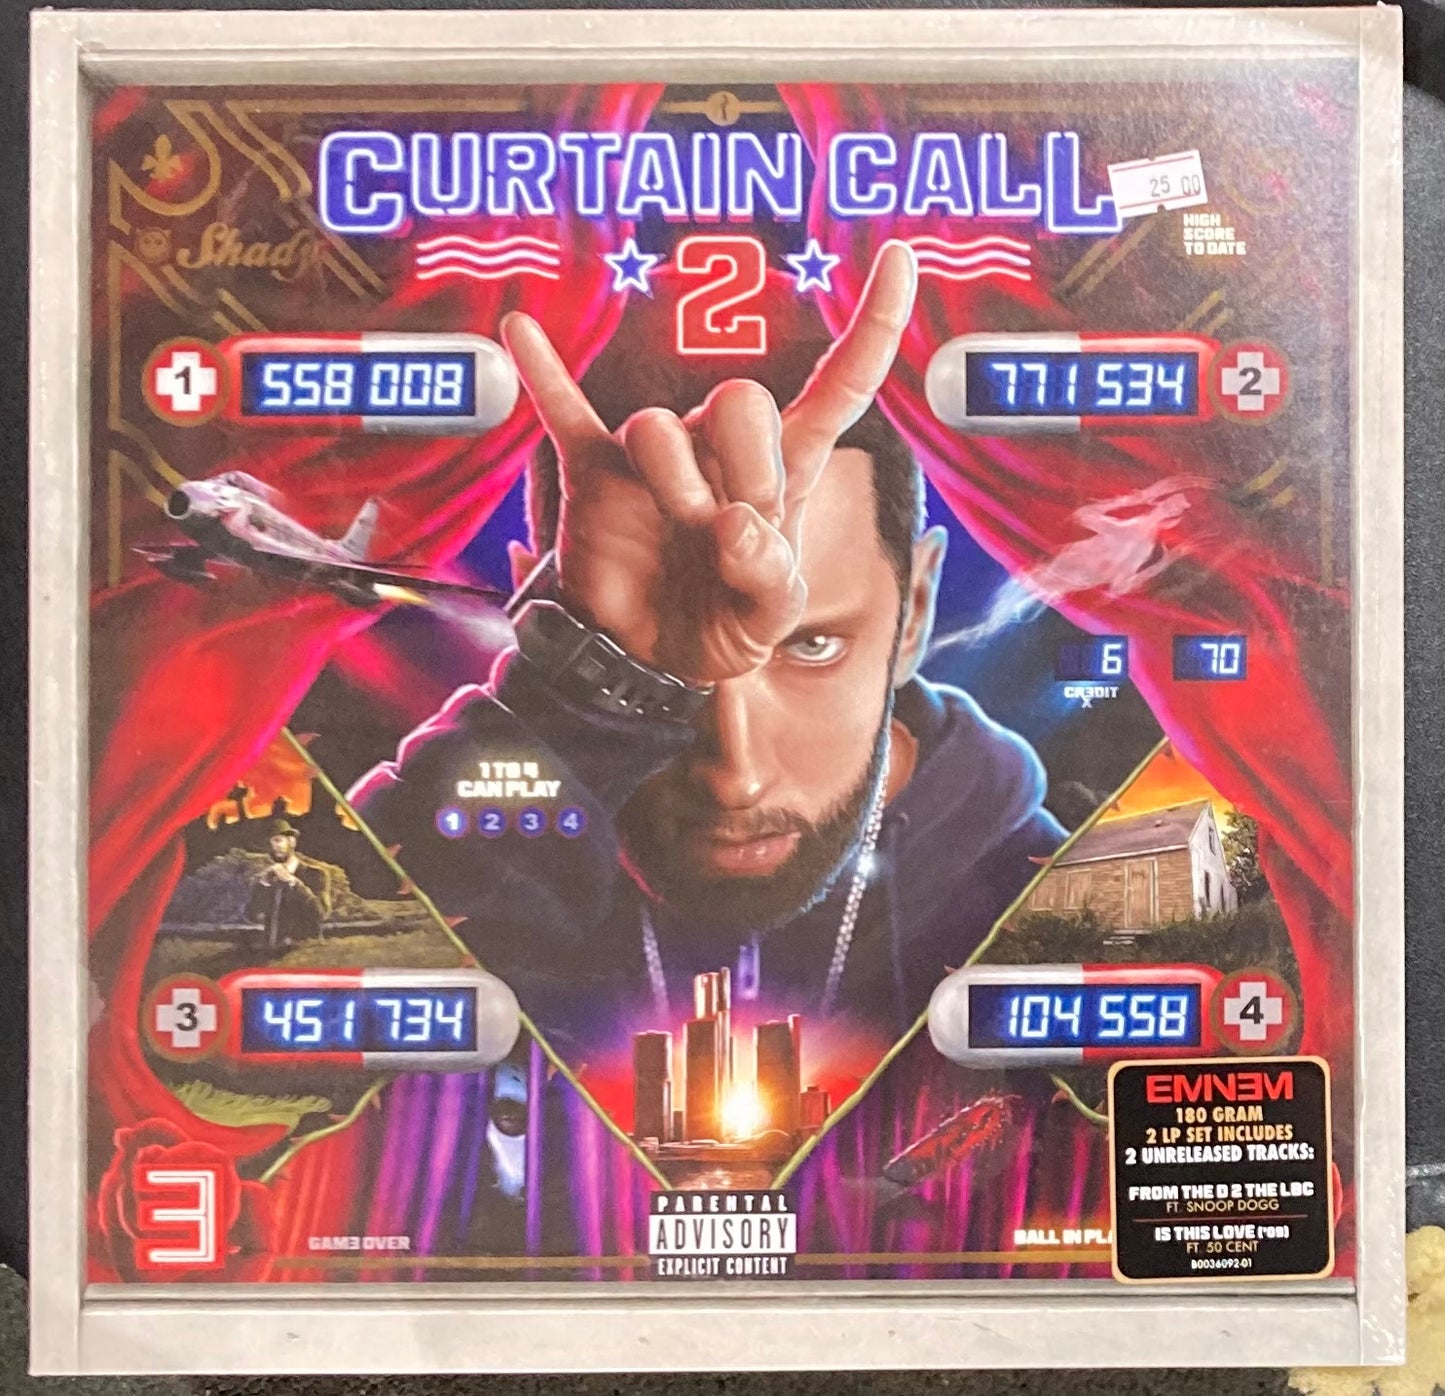 The front of 'Eminem - Curtain Call 2' on vinyl